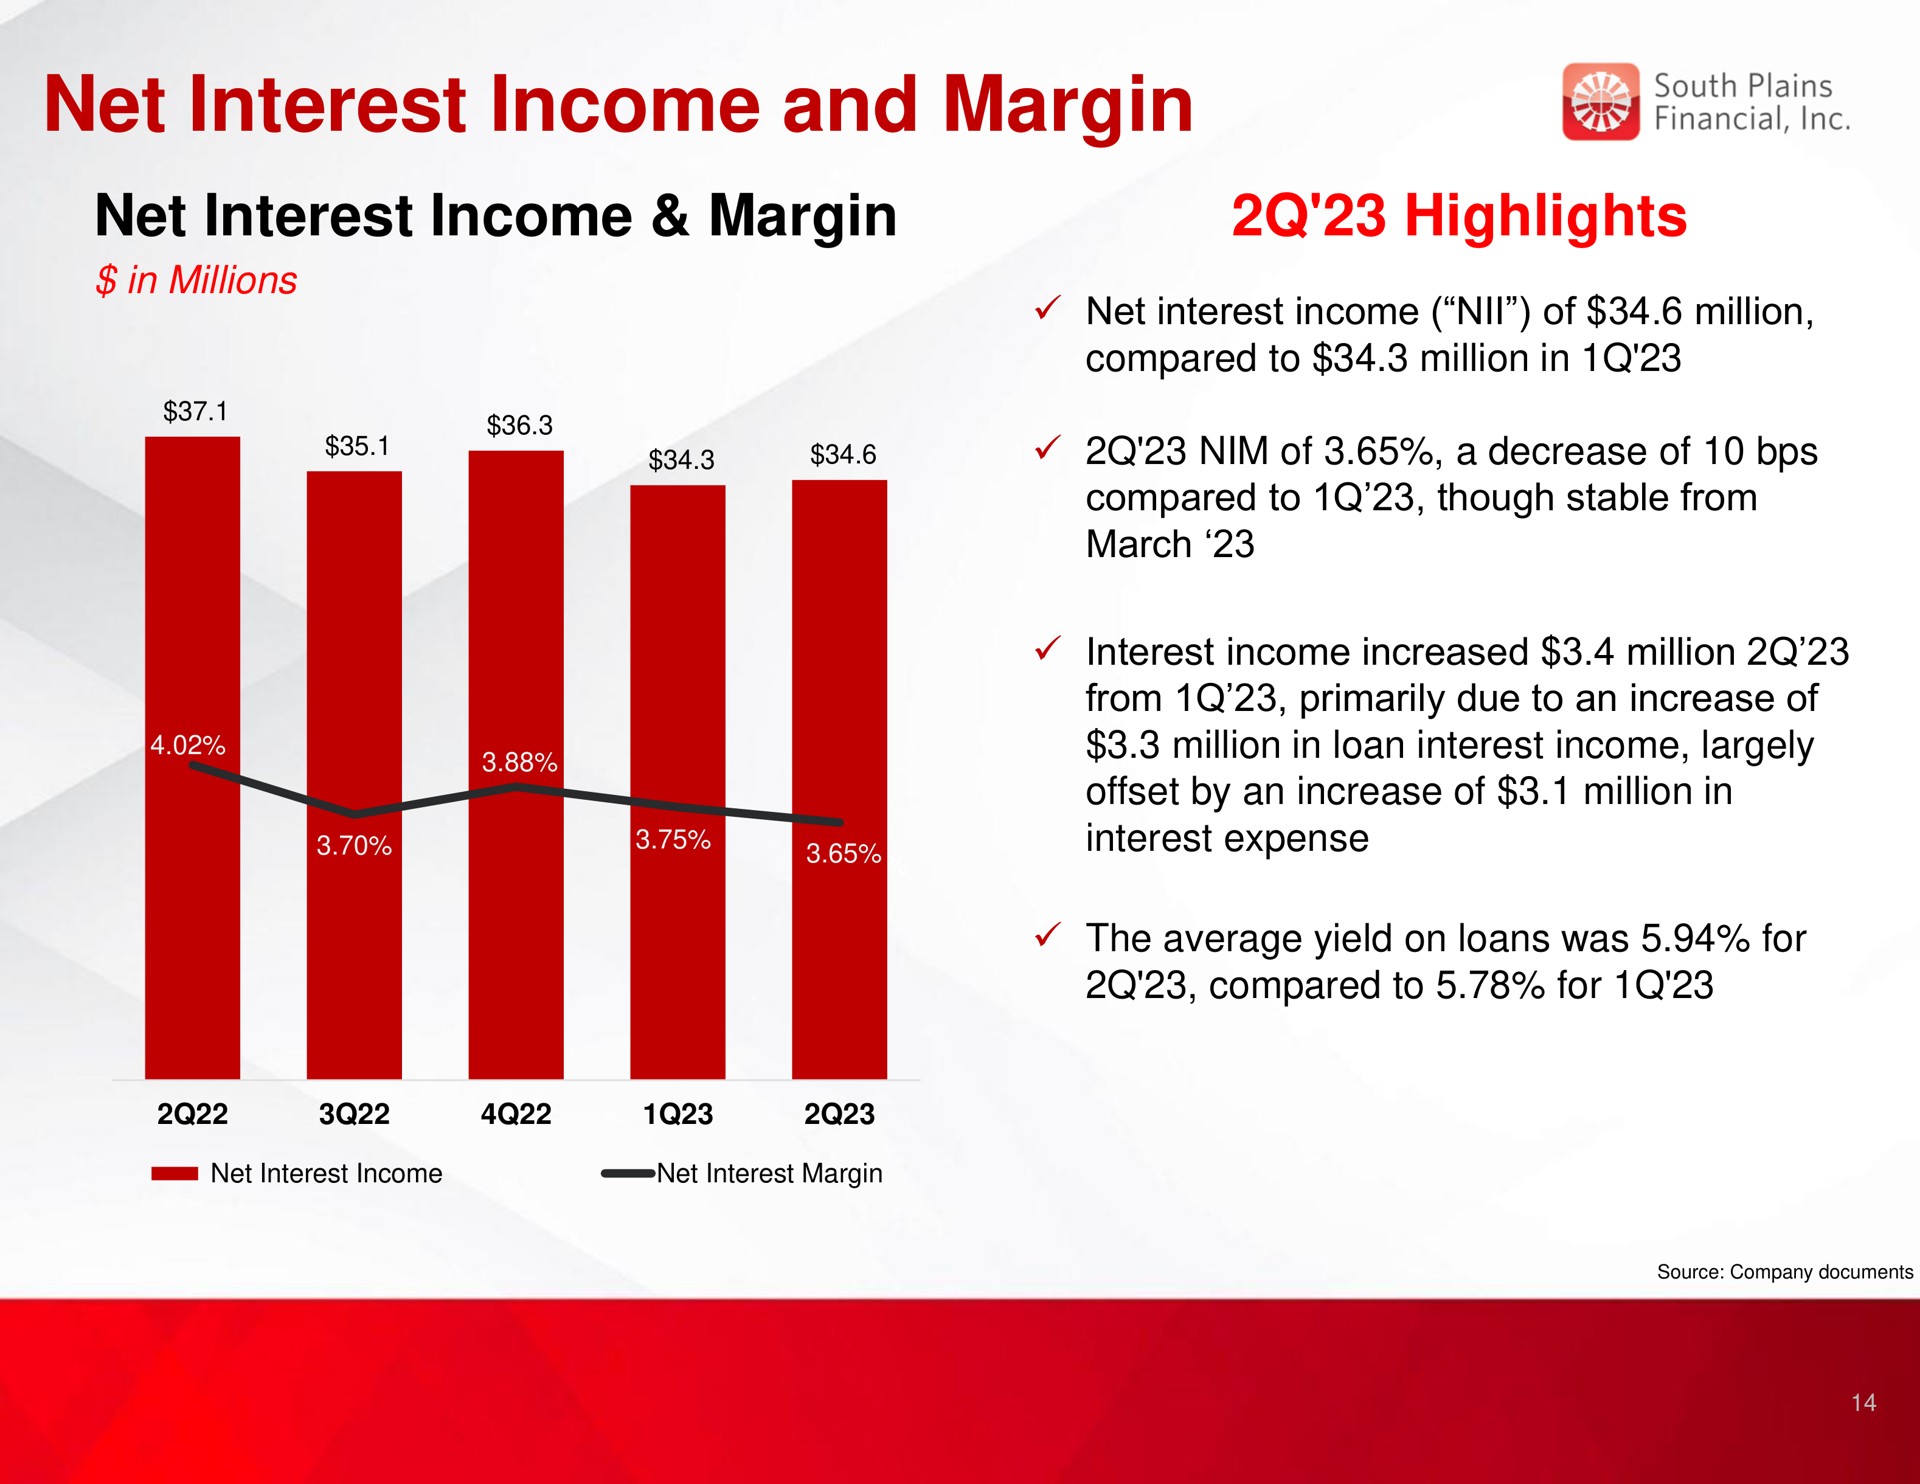 net interest income and margin net interest income margin highlights financial | South Plains Financial